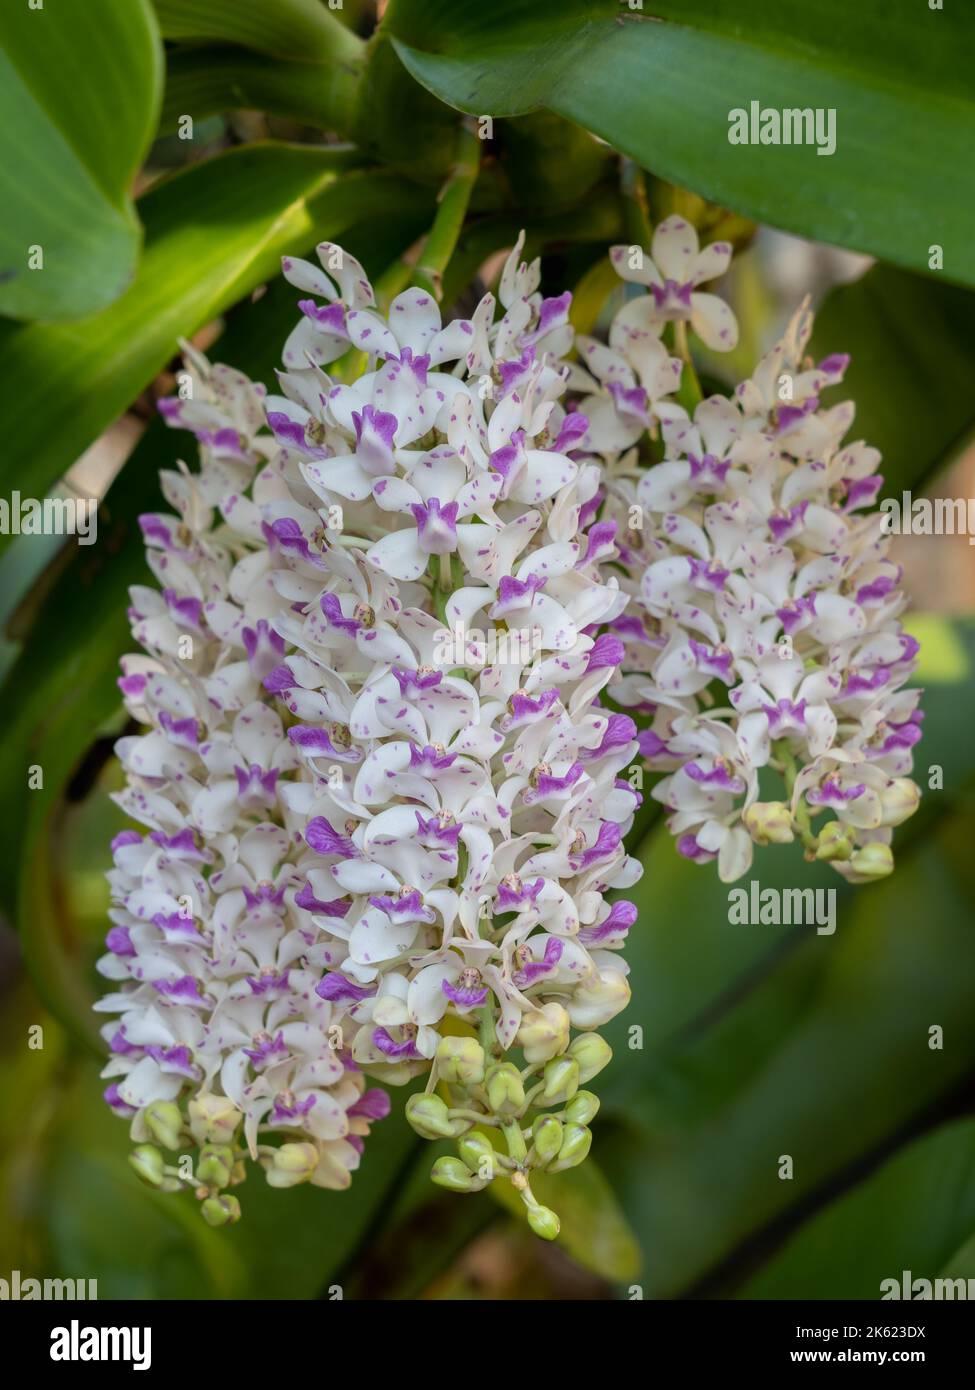 Closeup view of white and purple clusters of flowers of rhynchostylis gigantea epiphytic orchid species blooming outdoors on natural background Stock Photo